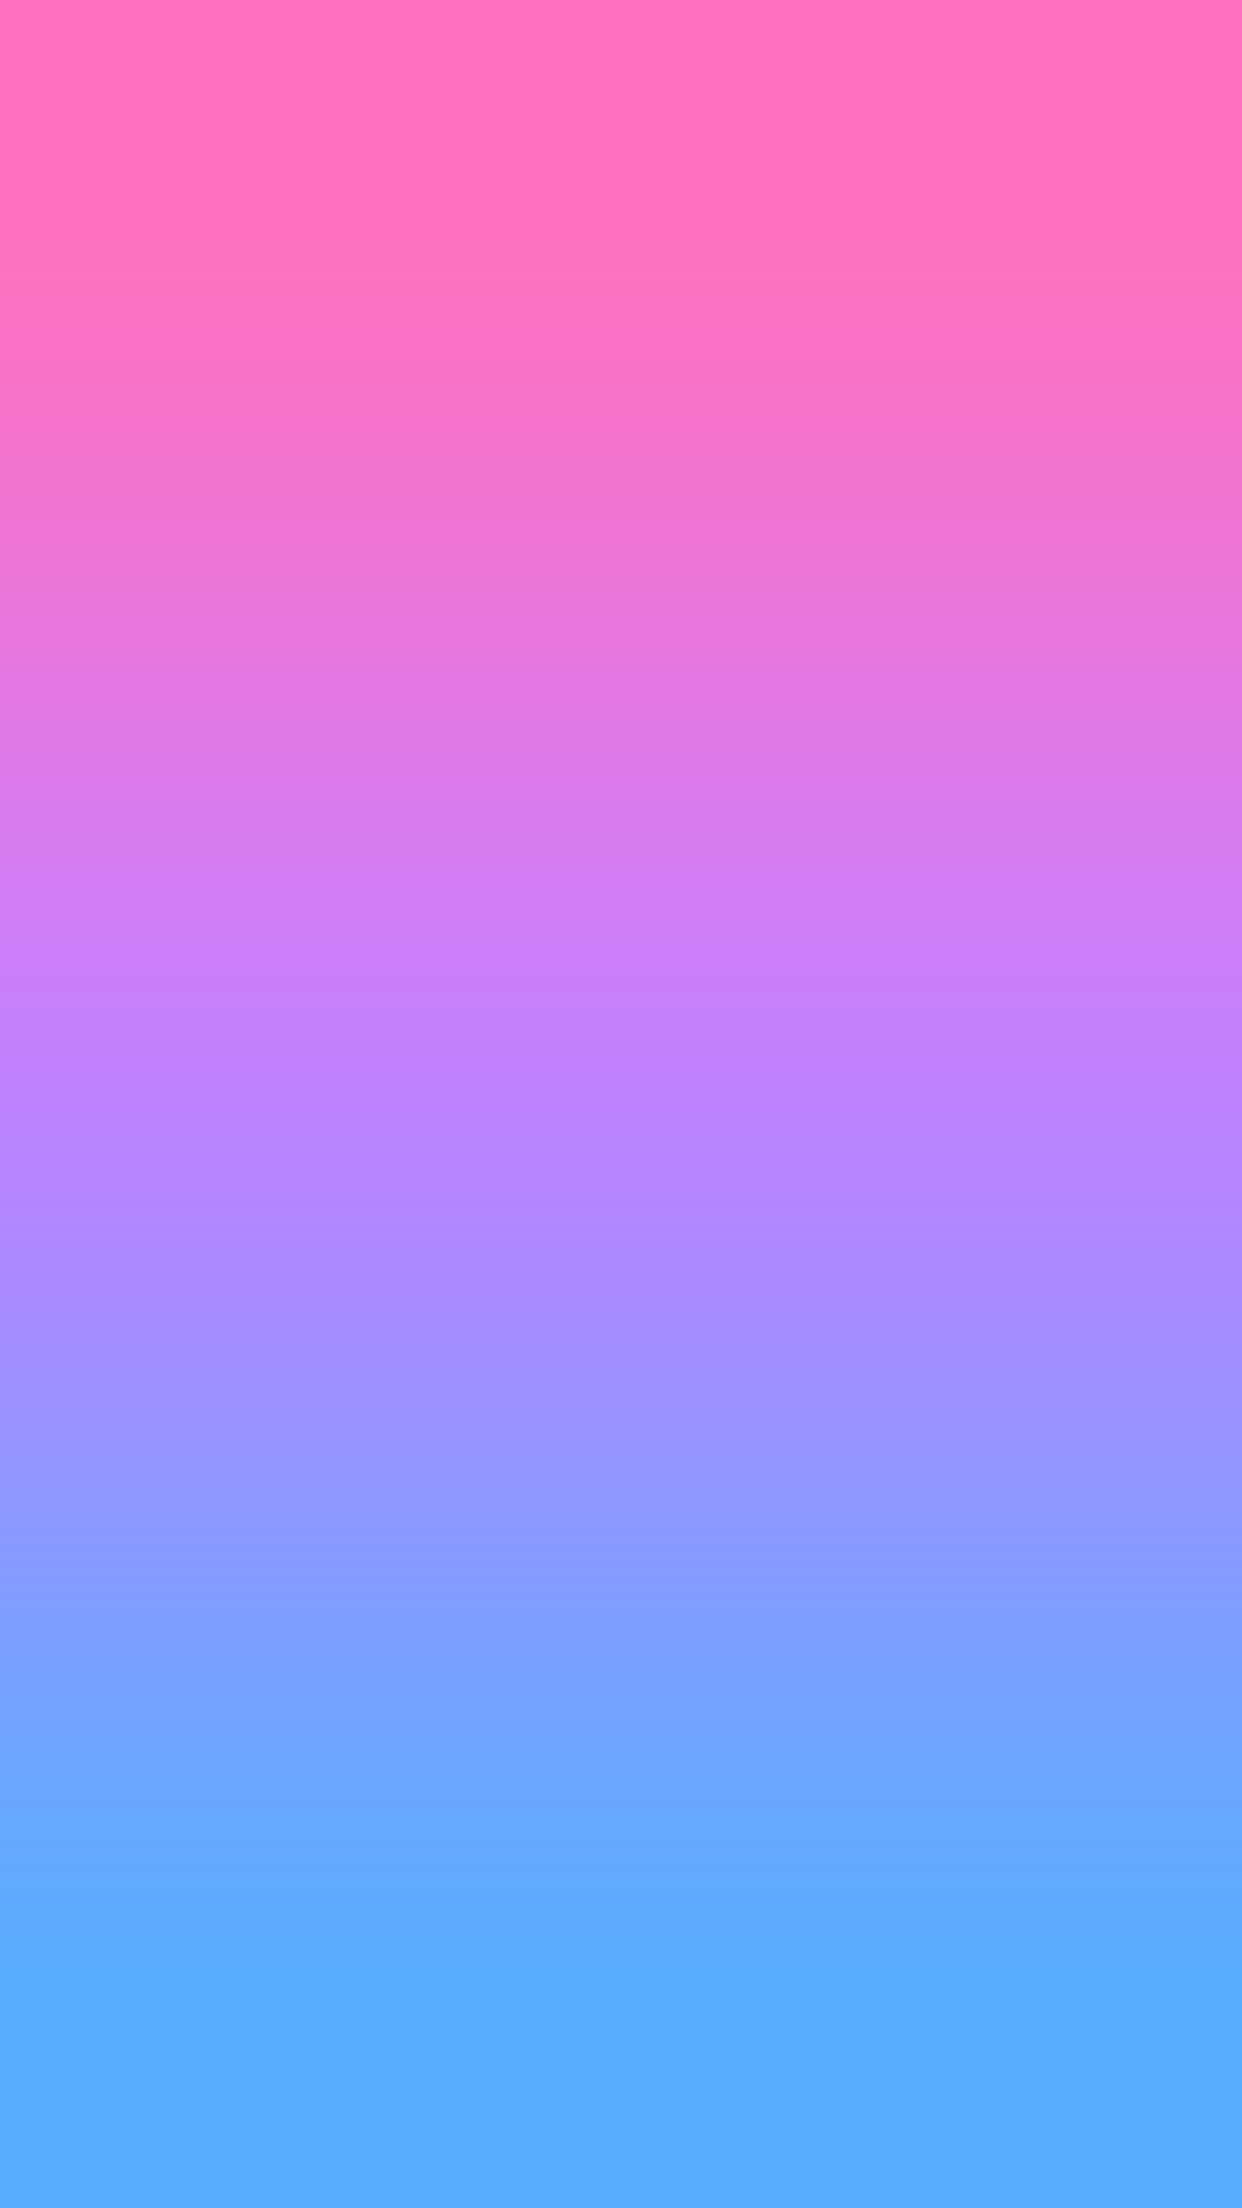 A beautiful gradient between blue and pink